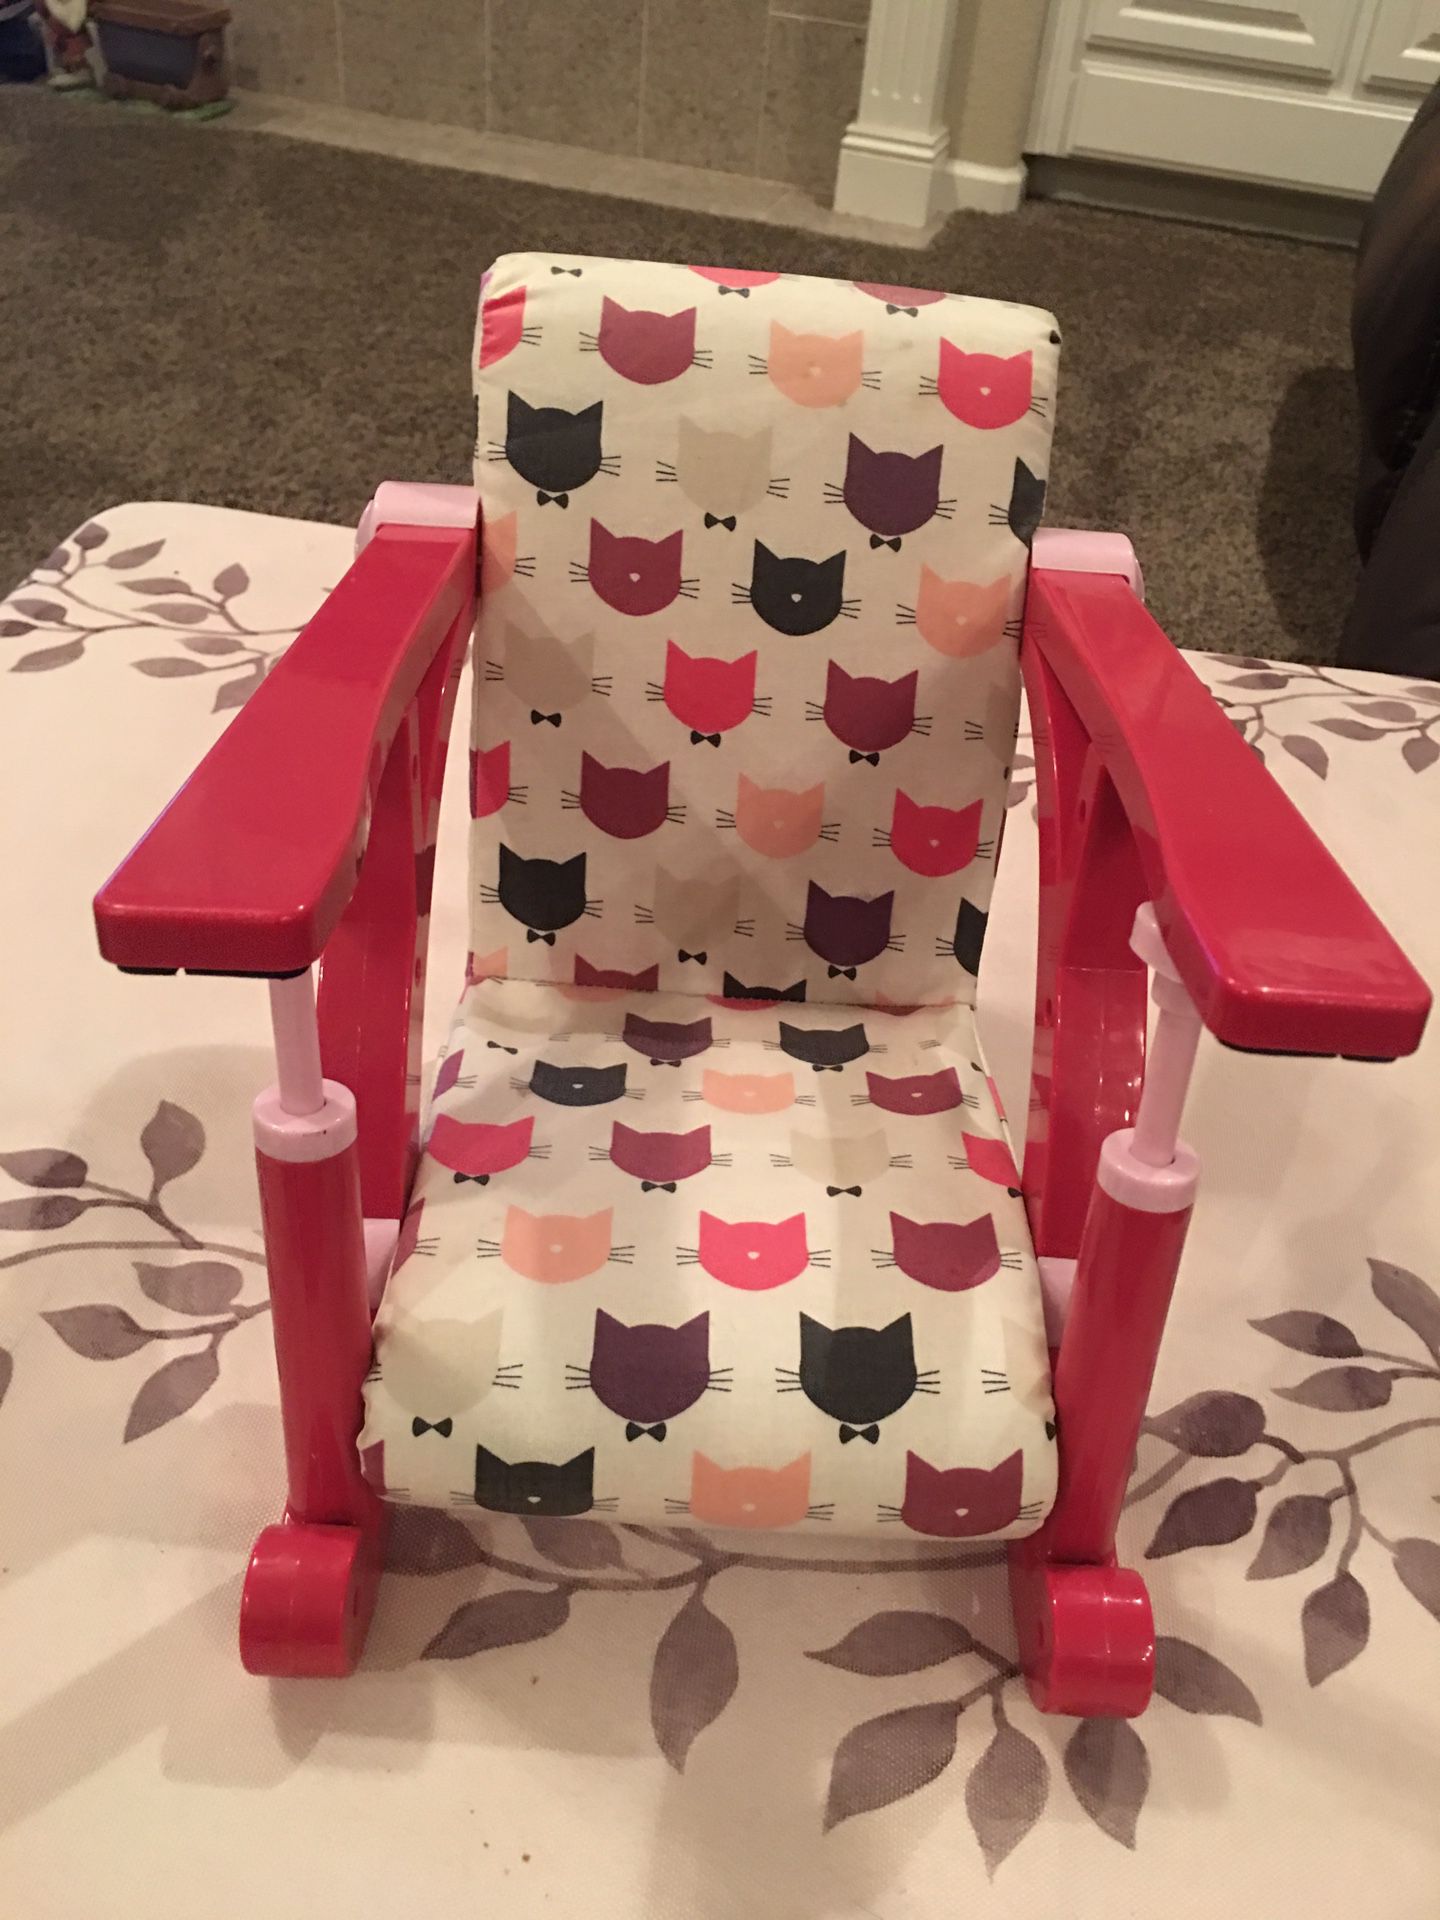 DOLL CHAIR! CLIPS ONTO TABLE - HOLDS up to 15 INCH DOLL! HOLDS OG DOLL OR AMERICAN GIRL DOLL